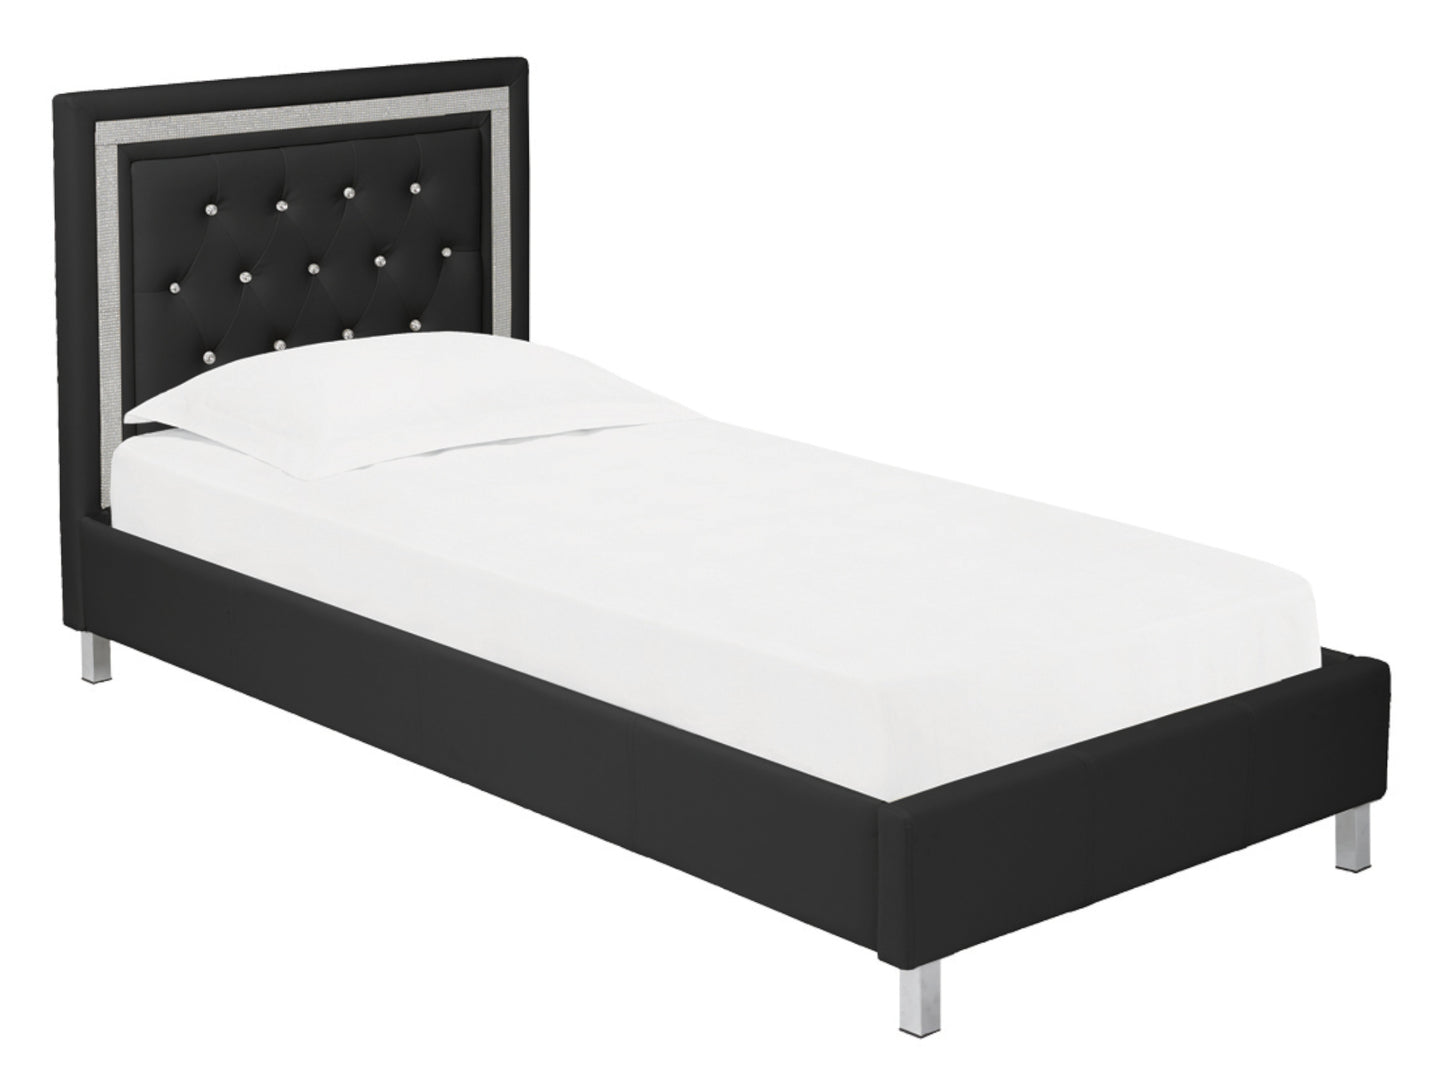 Crystalle Bed Frame in Black Faux Leather